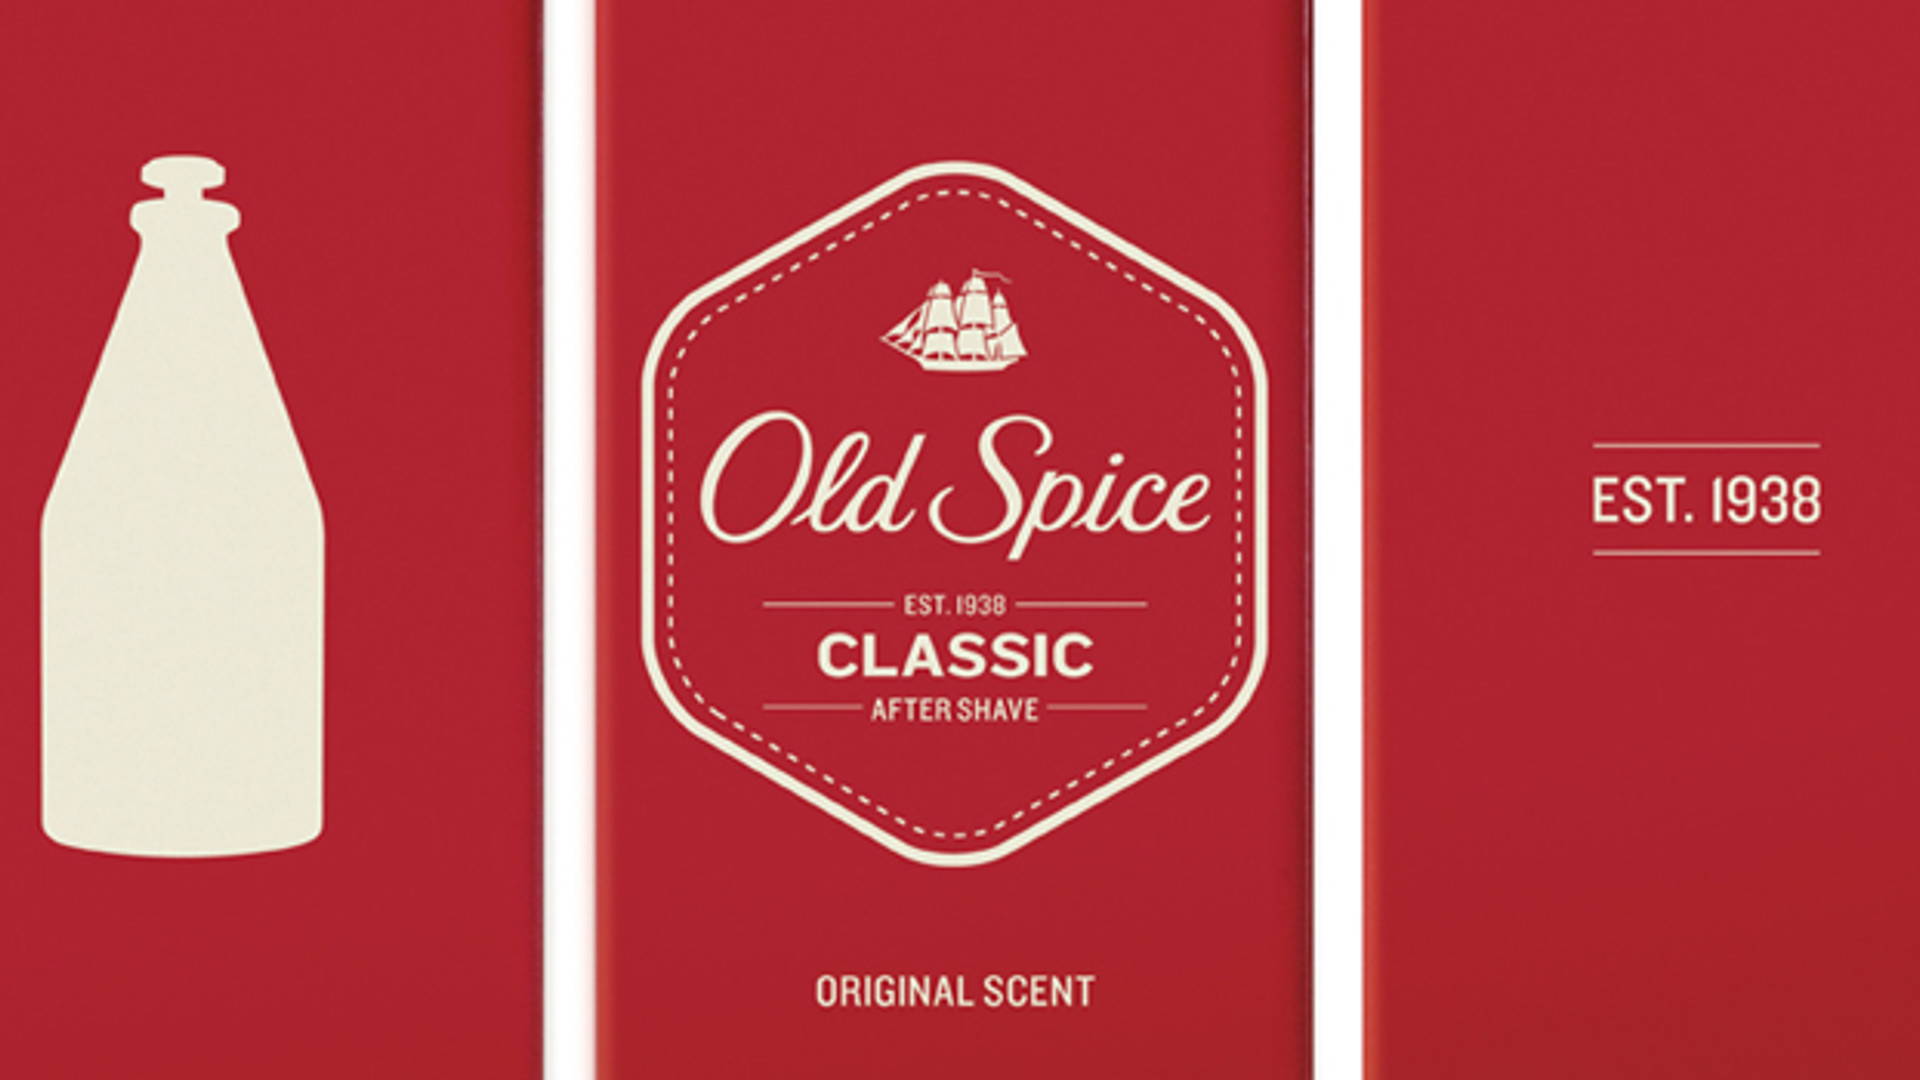 Featured image for Old Spice Classic